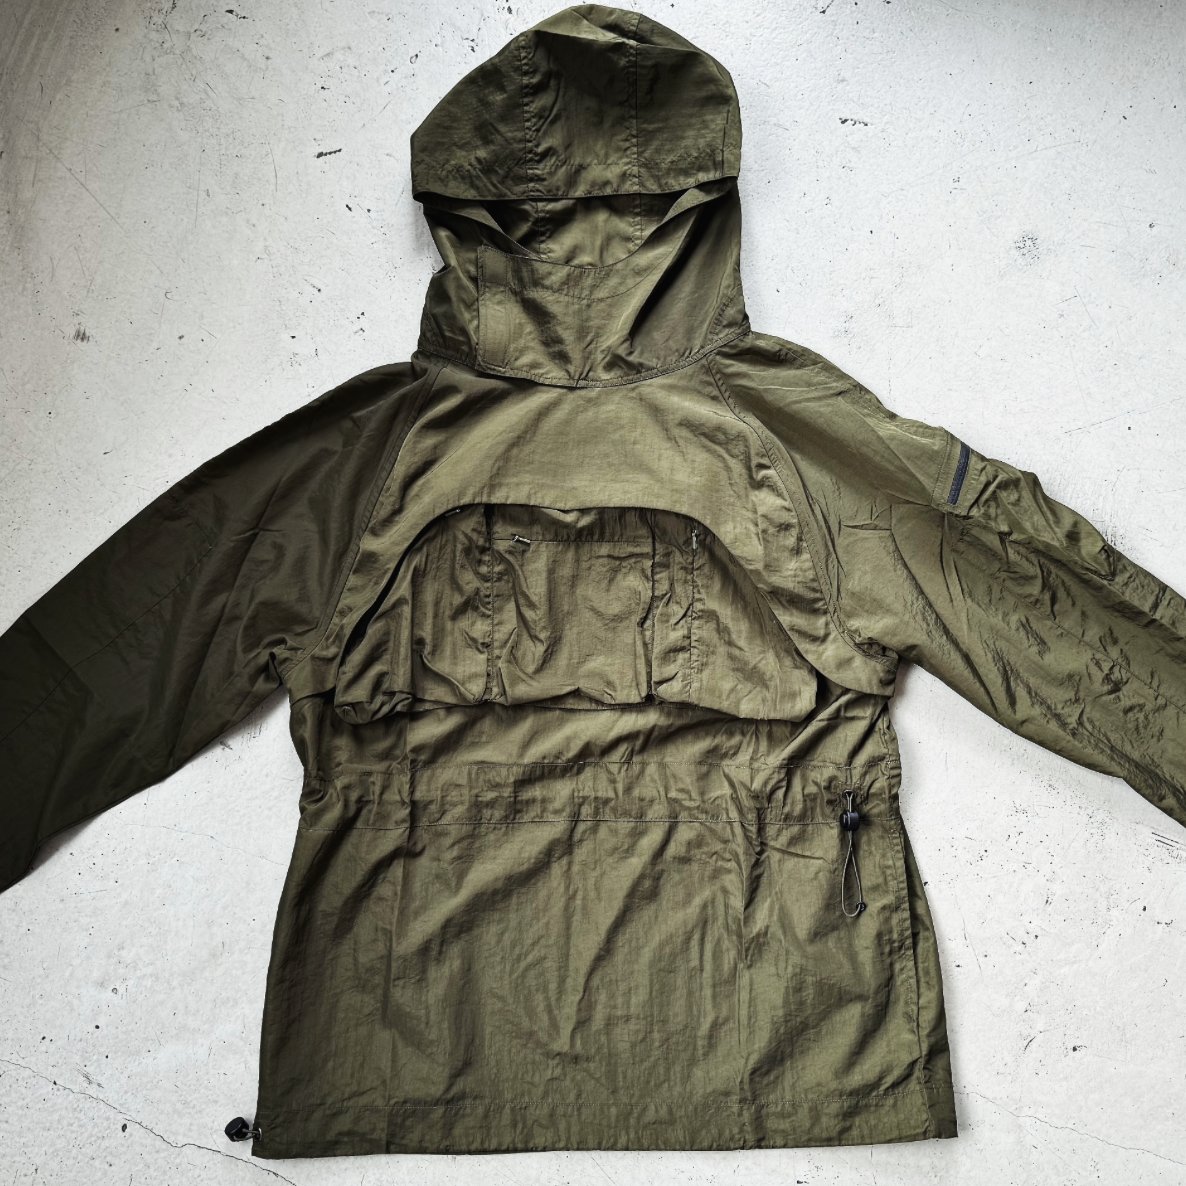 Module-R in olive water-resistant corrugated nylon. Contact: info@hawkwoodmercantile.com #hawkwoodmercantile #hawkwood #smocks #smock #jackets #jacket #coats #coat #modularclothing #menswear #outerwear